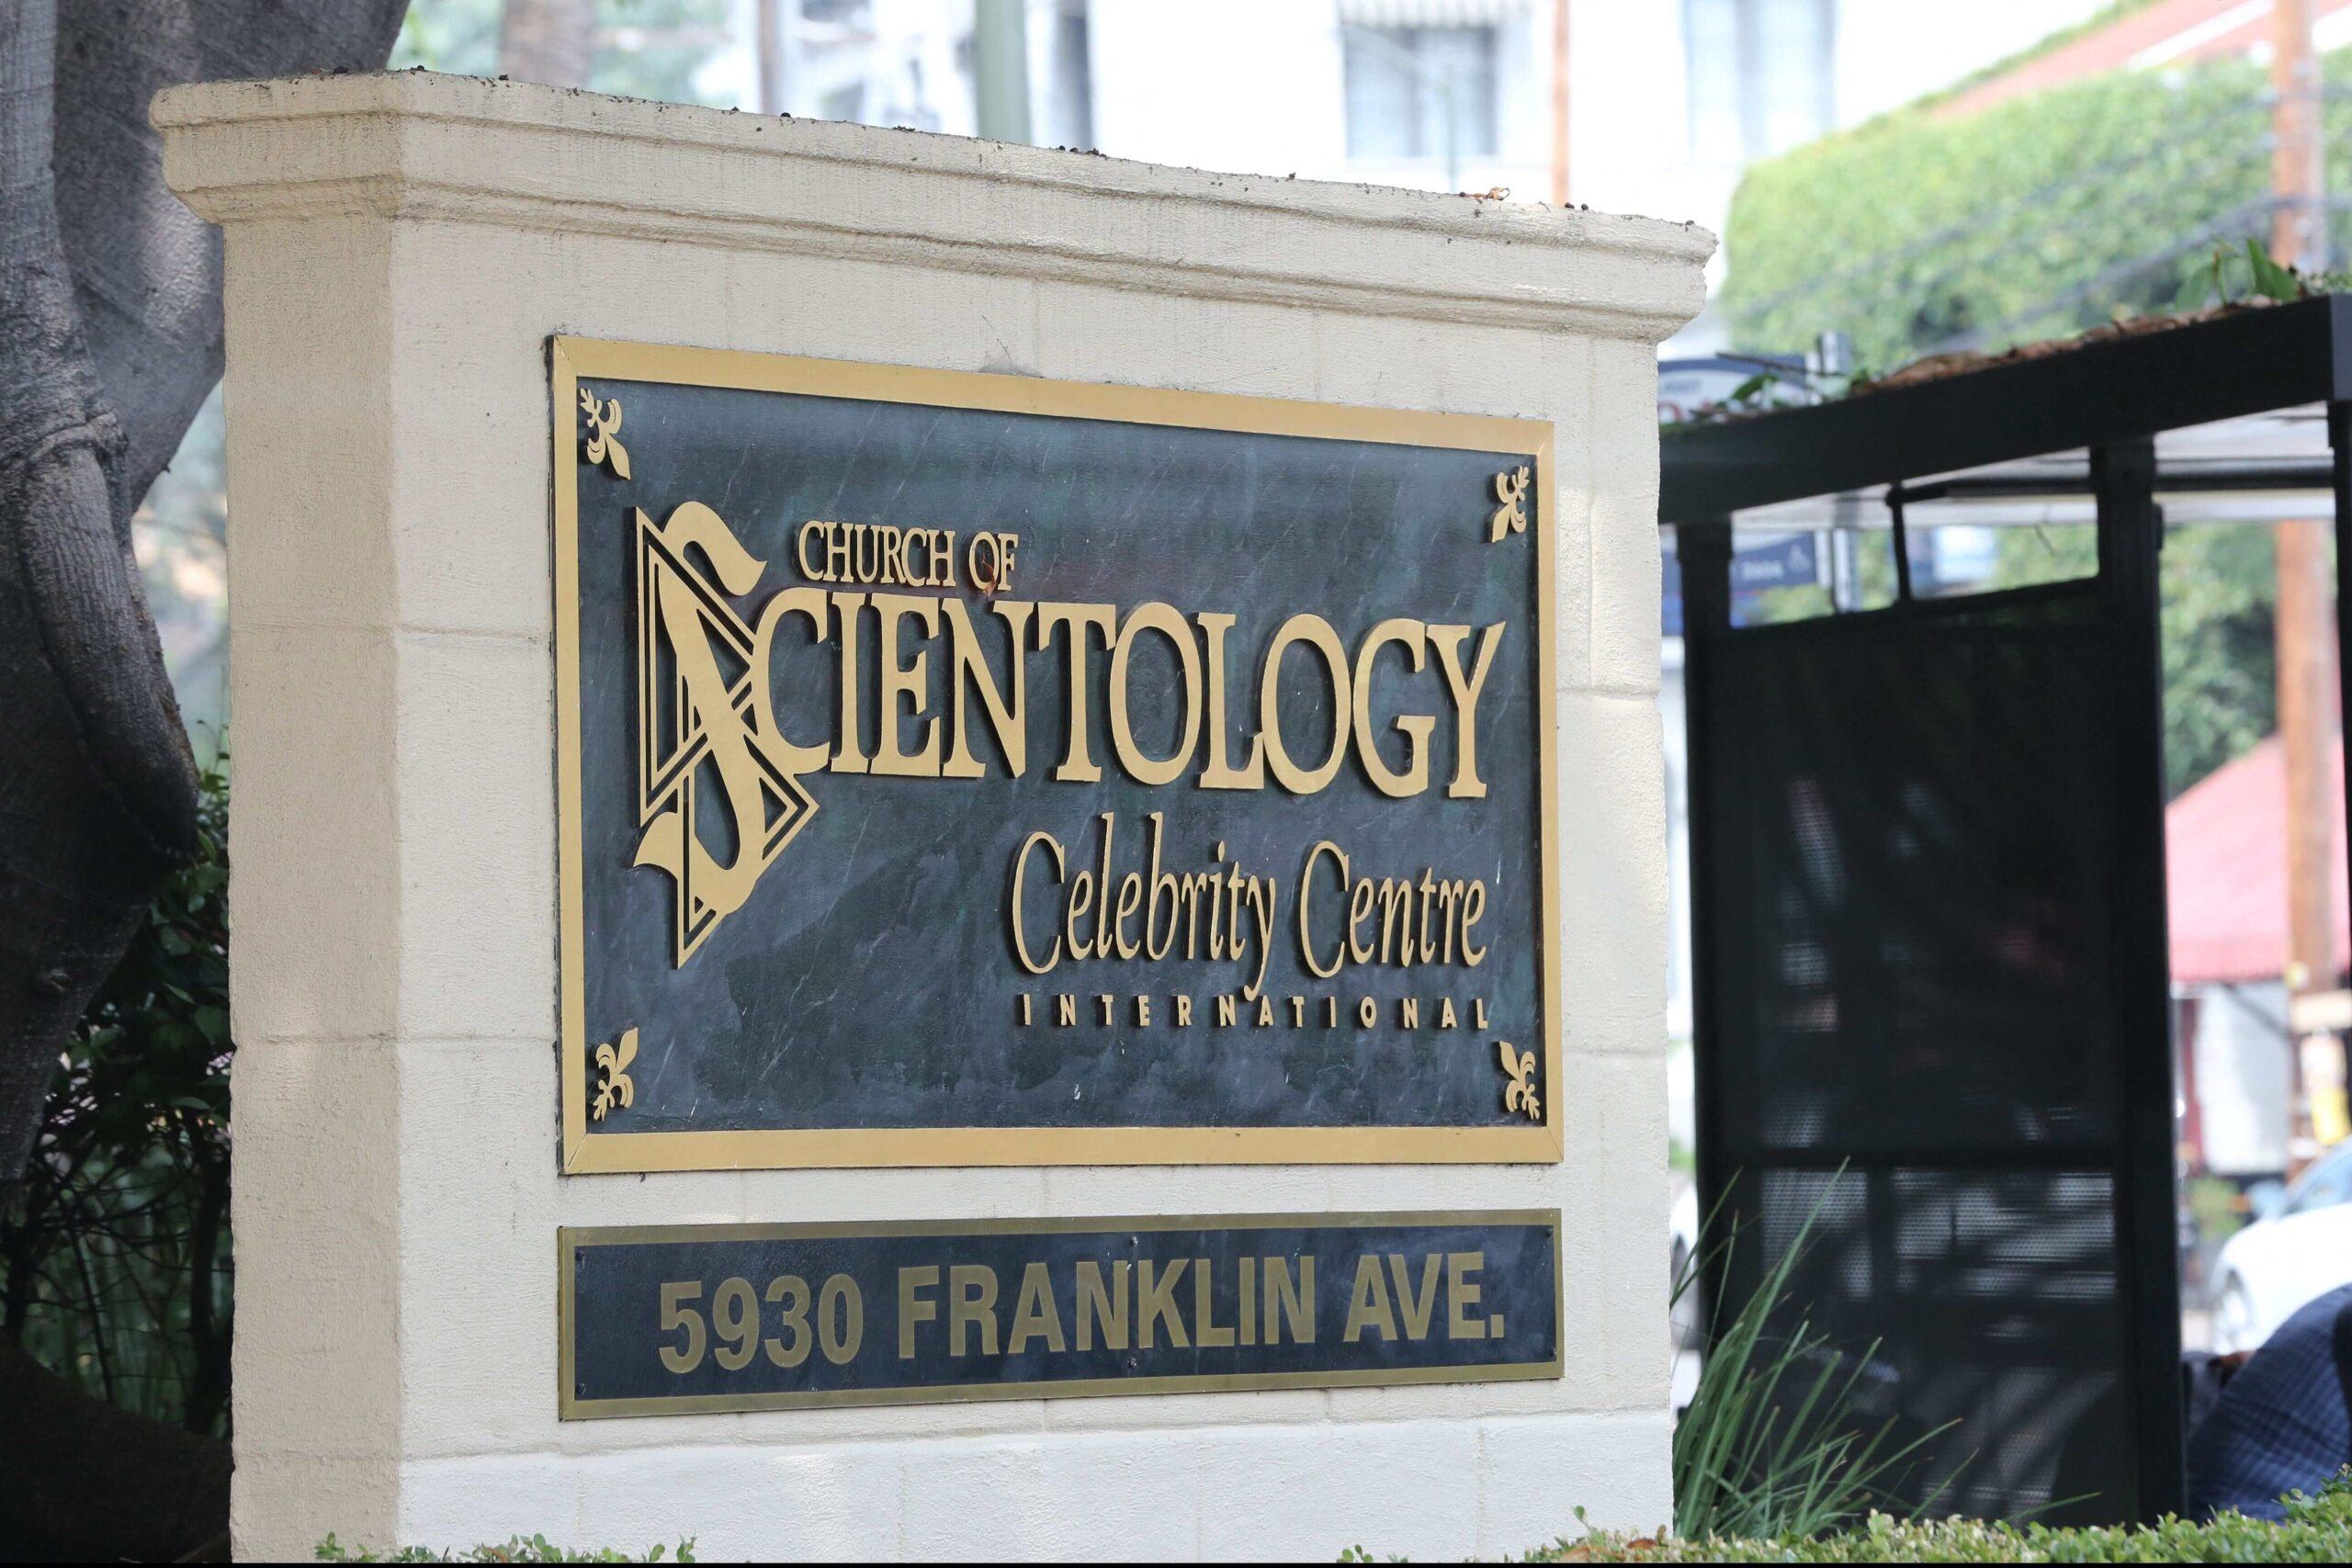 Leah Remini Accuses Scientology 'Operatives' Of Terrorizing Her Elderly Mom